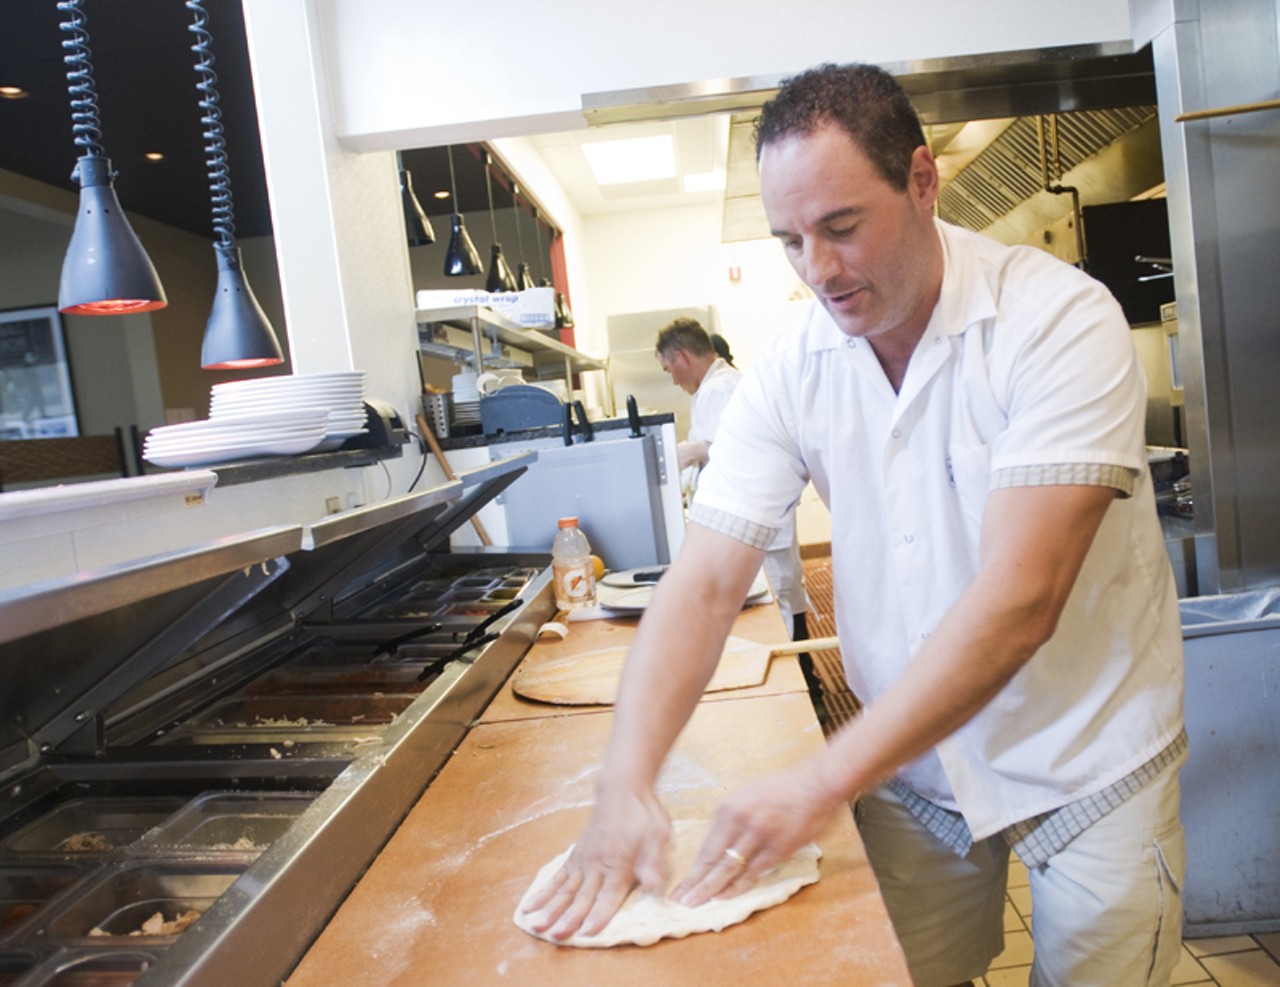 John Racanelli, owner of the Racanelli Empire, says one of the secrets to his pizza is working it on the board. The more you work it, the more air you get out of the dough, creating fewer air bubbles when cooking.